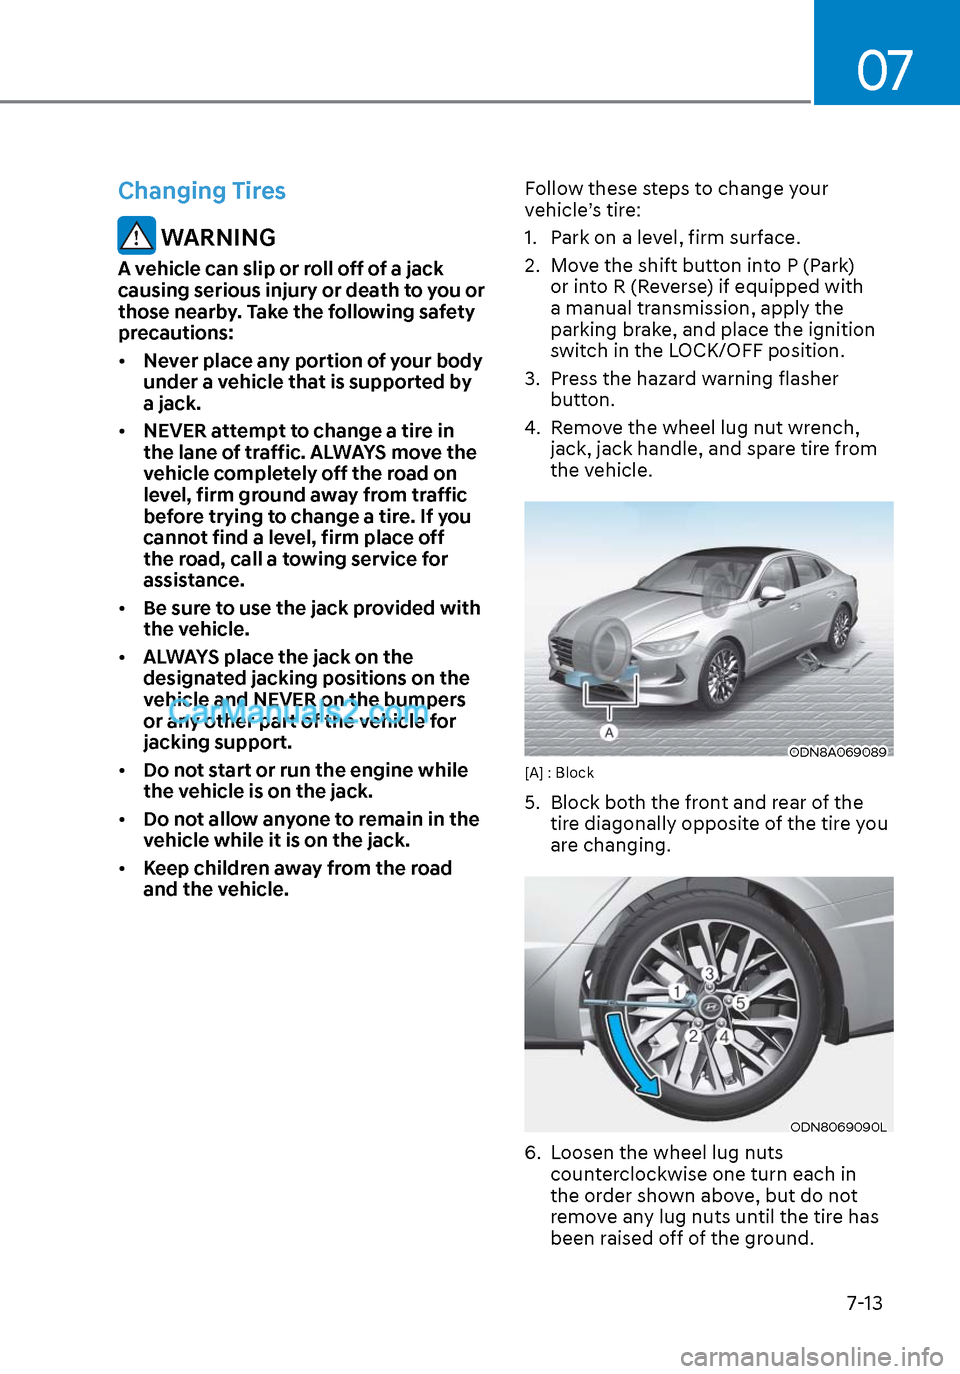 Hyundai Sonata 2020  Owners Manual 07
7-13
Changing Tires
 WARNING
A vehicle can slip or roll off of a jack 
causing serious injury or death to you or 
those nearby. Take the following safety 
precautions:
• Never place any portion o